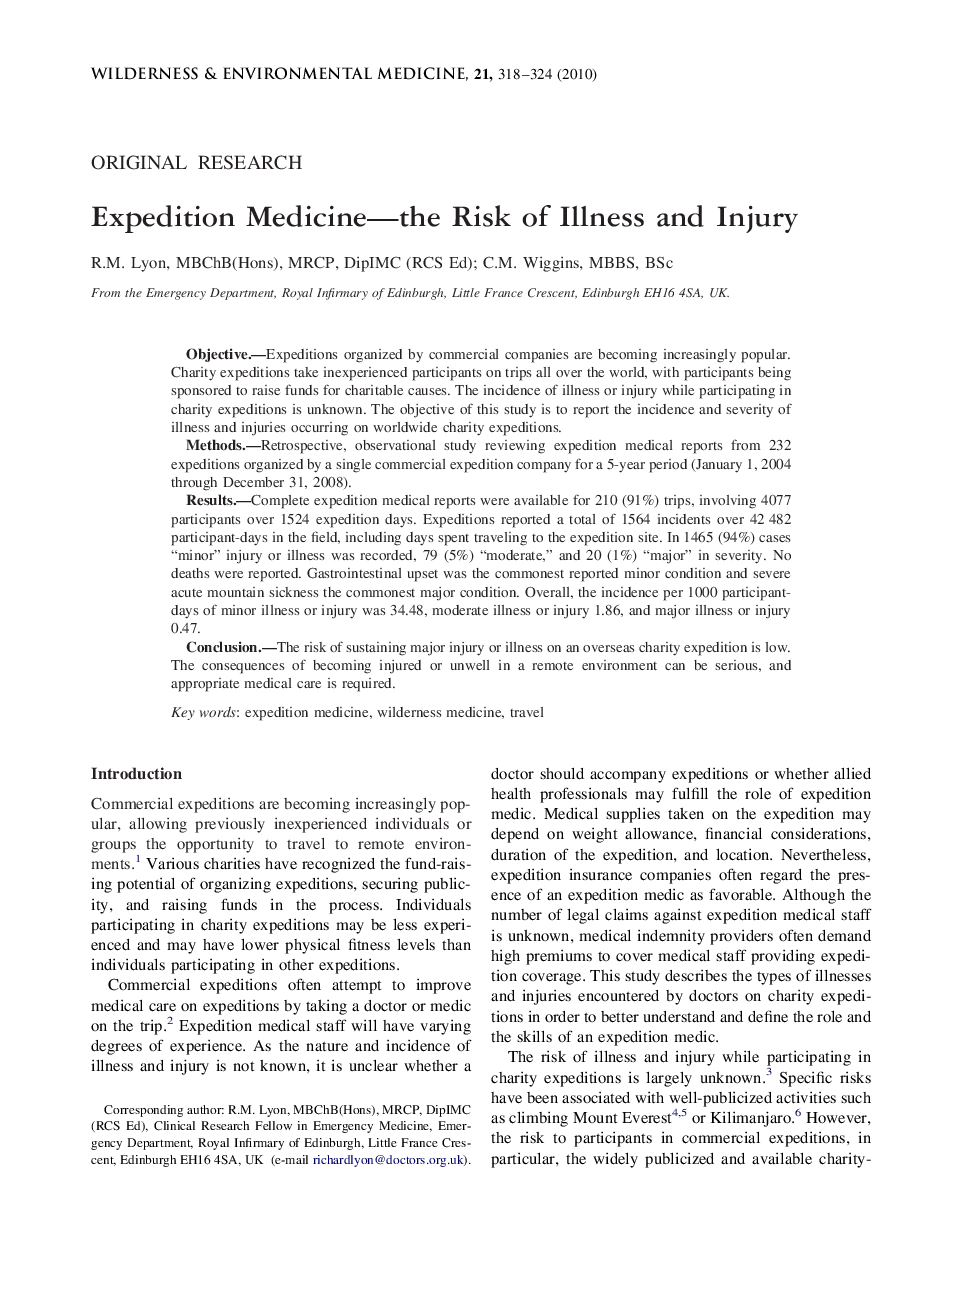 Expedition Medicine—the Risk of Illness and Injury